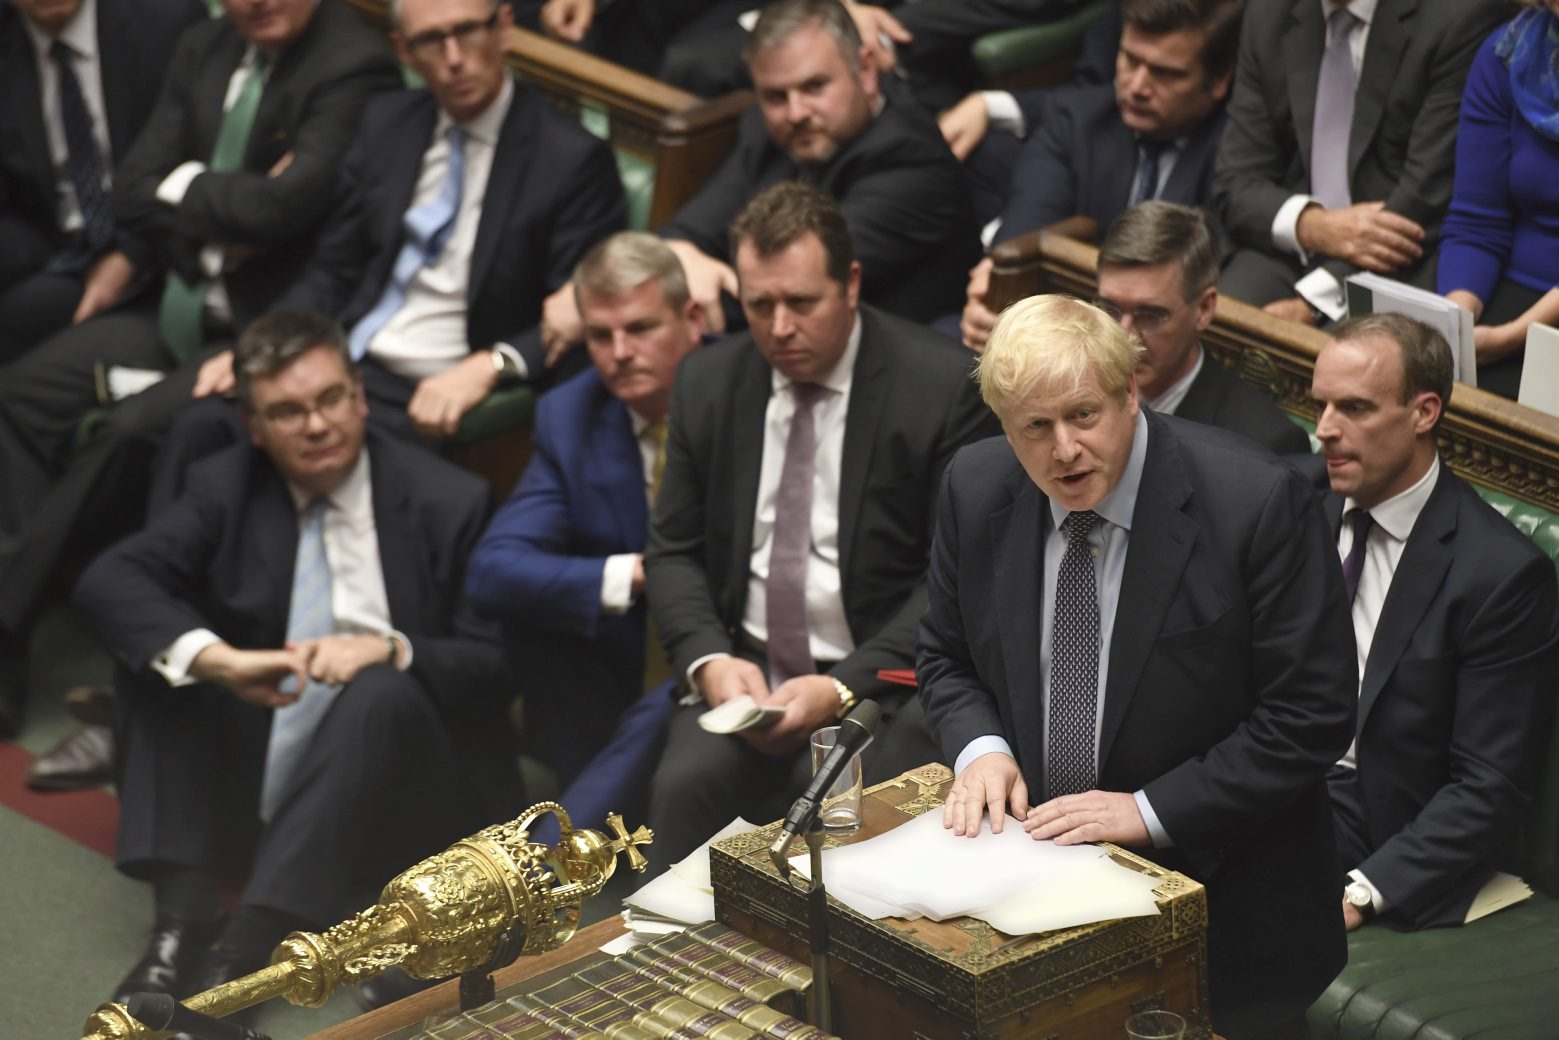 Britain's Prime Minister Boris Johnson speaks during the Brexit debate inside the House of Commons in London Saturday Oct. 19, 2019. At the rare weekend sitting of Parliament, Prime Minister Boris Johnson implored legislators to ratify the Brexit deal he struck this week with the other 27 EU leaders. Lawmakers voted Saturday in favour of the 'Letwin Amendment', which seeks to avoid a no-deal Brexit on October 31. (Jessica Taylor/House of Commons via AP) Britain Brexit